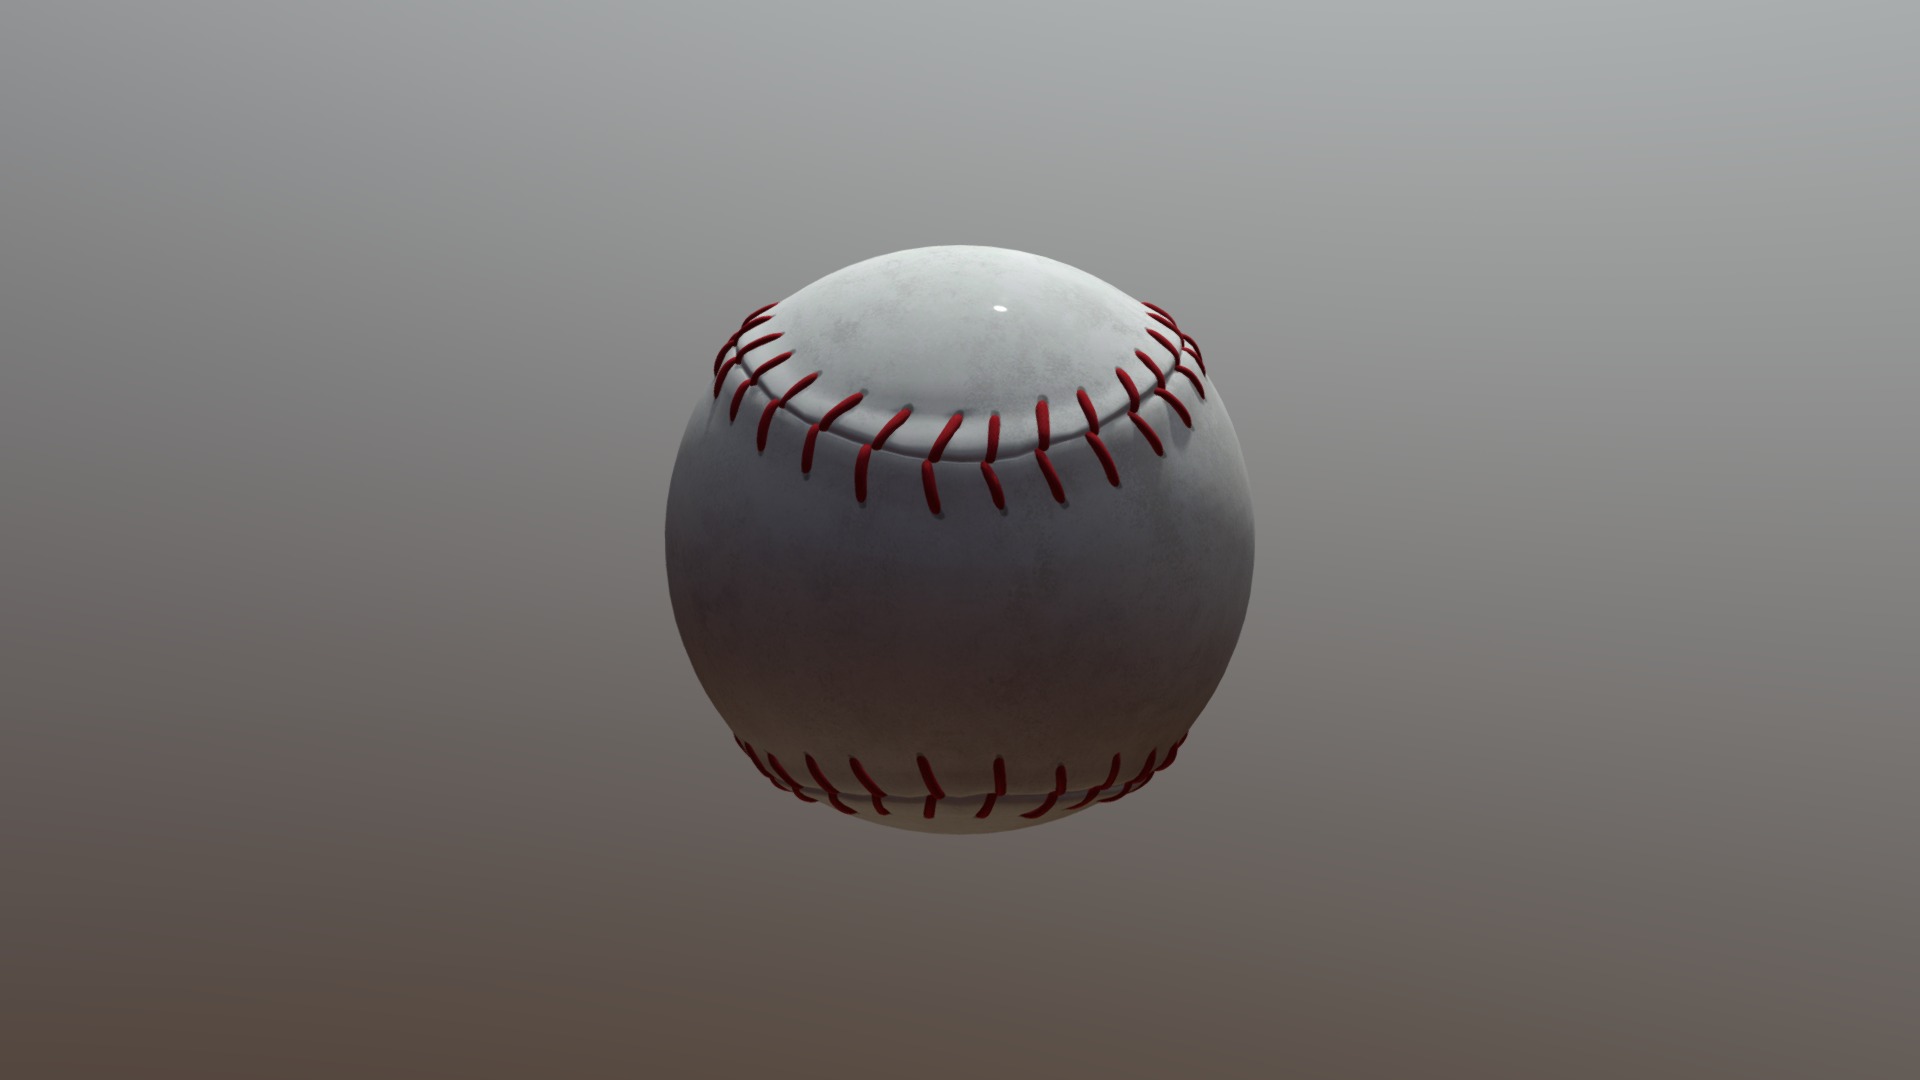 3D model Baseball-For Sports Ball Games - This is a 3D model of the Baseball-For Sports Ball Games. The 3D model is about a baseball on a white background.